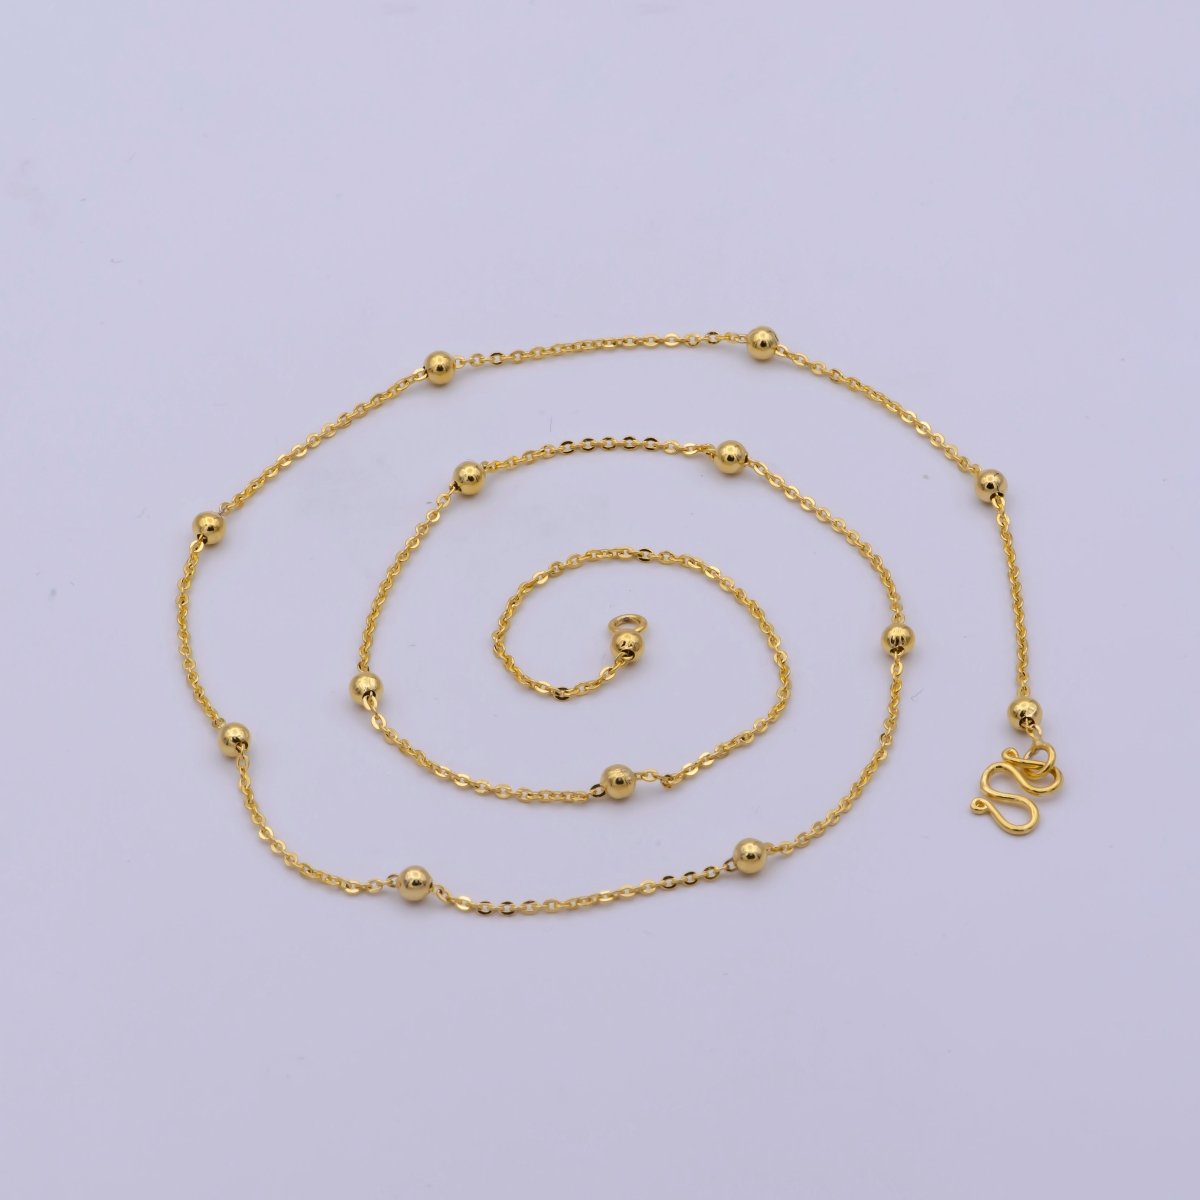 24K Gold Filled Satellite Chain Necklace, 17.5 Inch Cable Chain Necklace, Dainty 1.2mm Ball Necklace w/ M Clasp | WA-471 Clearance Pricing - DLUXCA